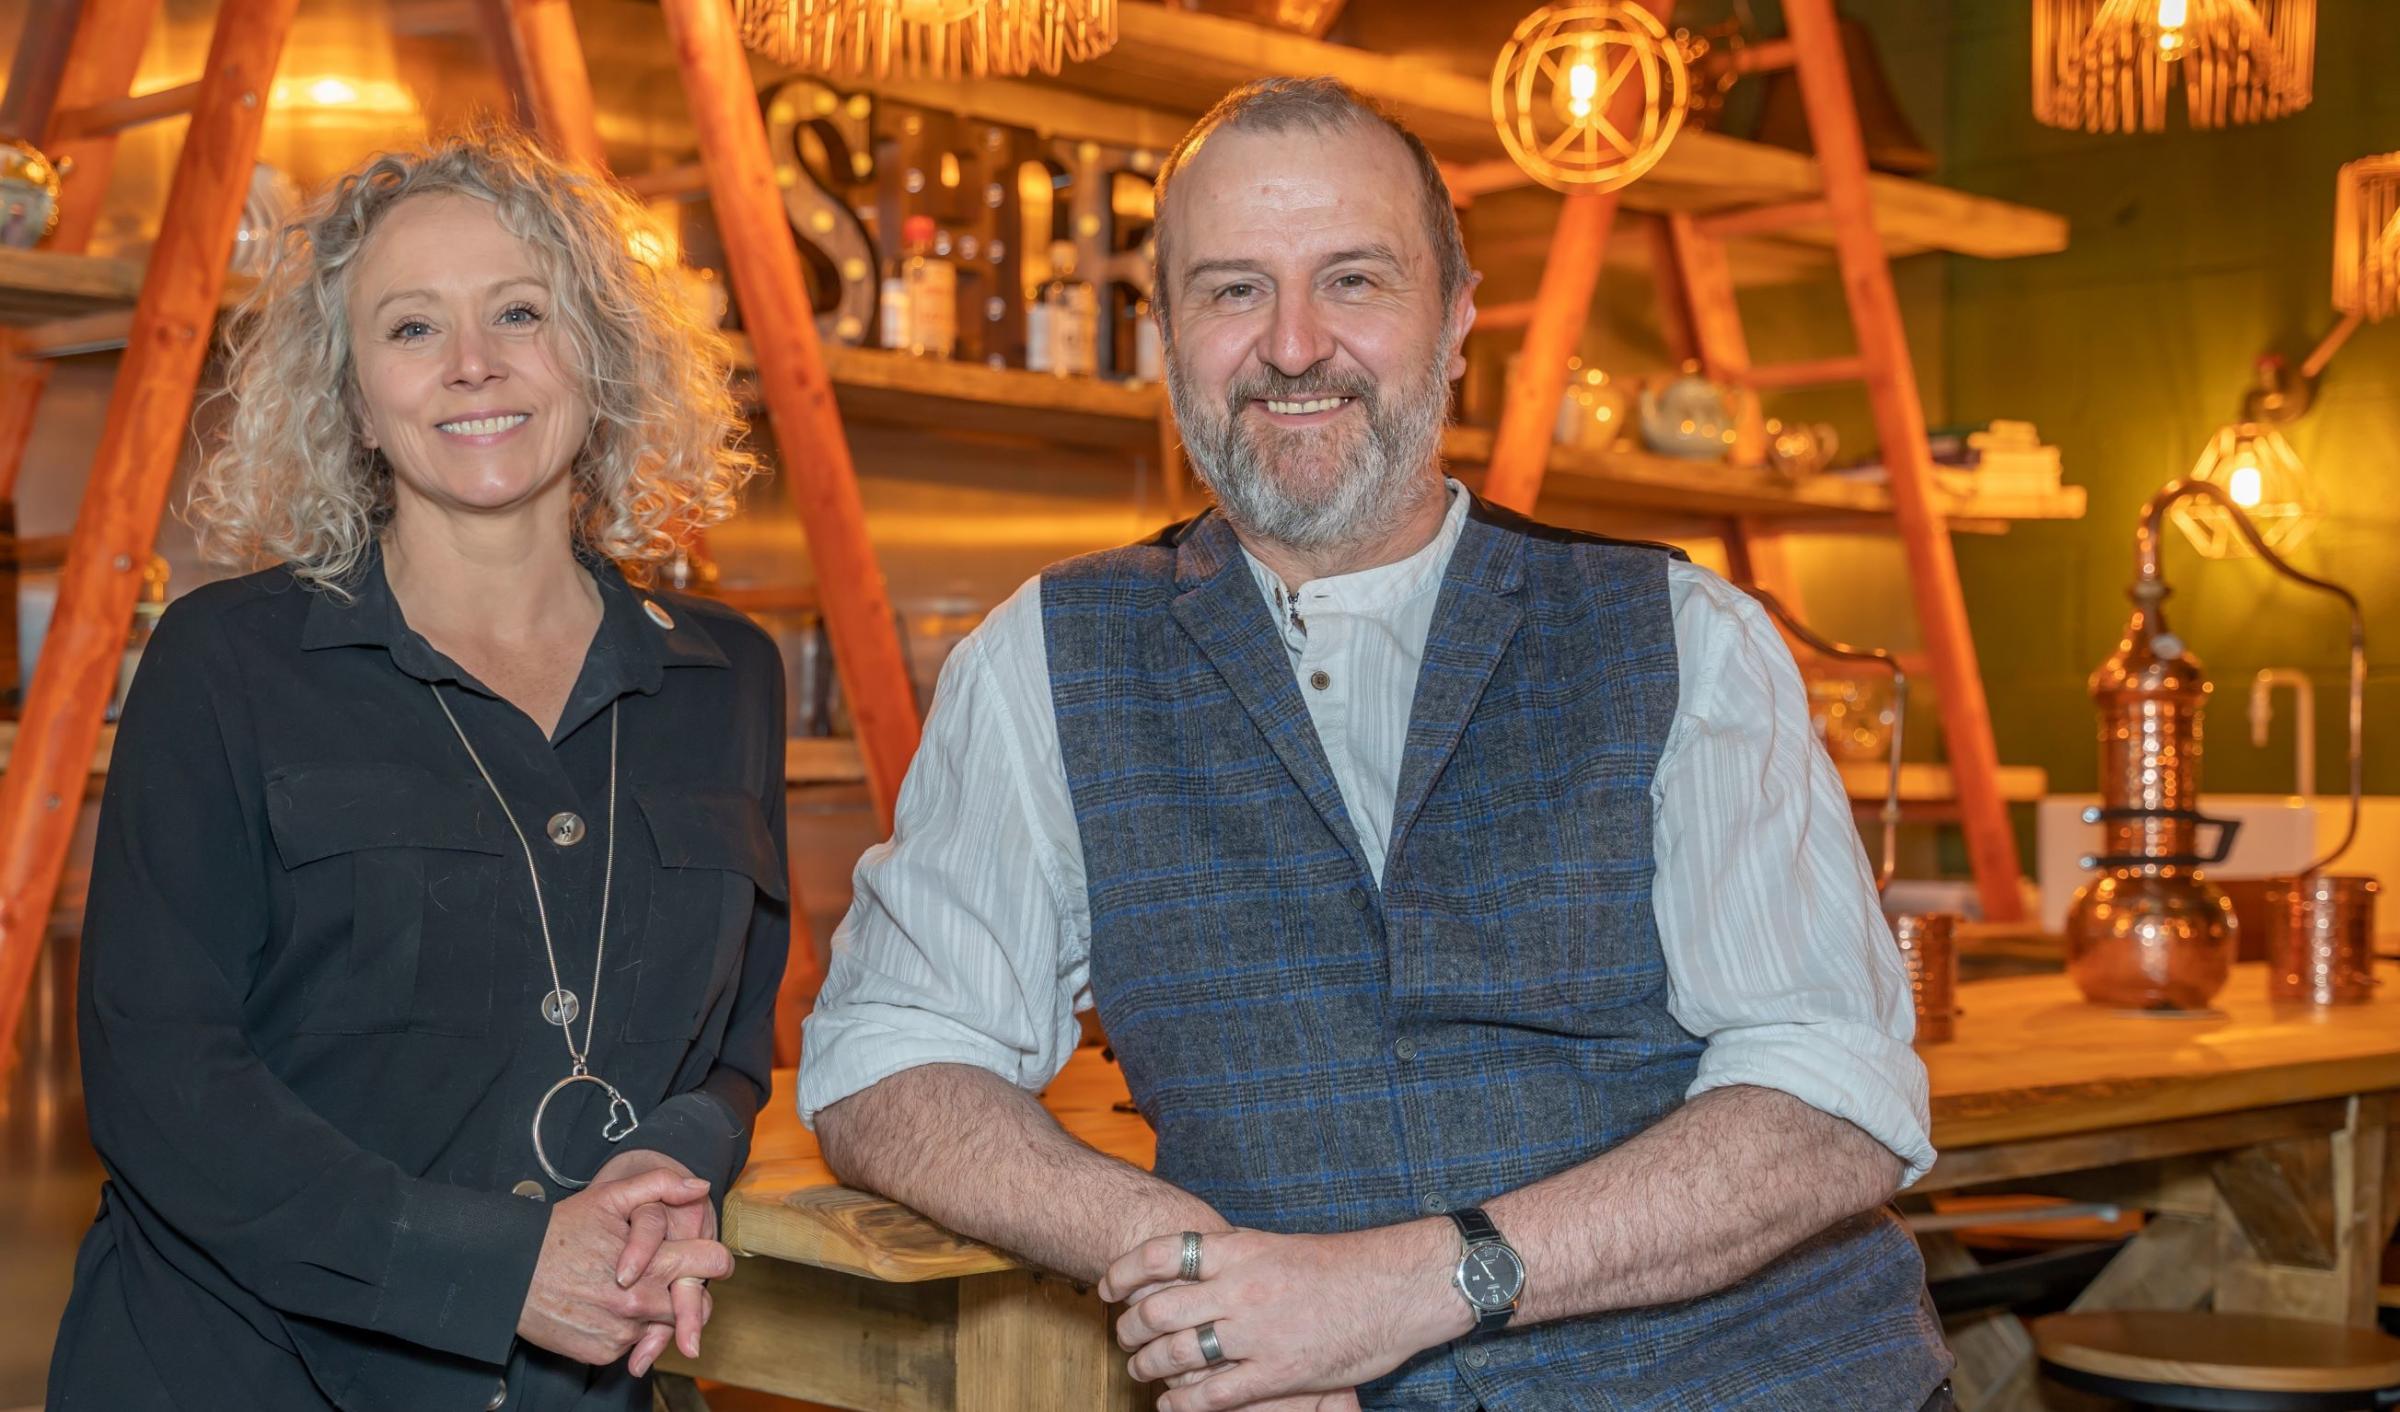 OWNERS: Zoe and Andy Arnold-Bennett, from Shed 1 Distillery, Ulverston